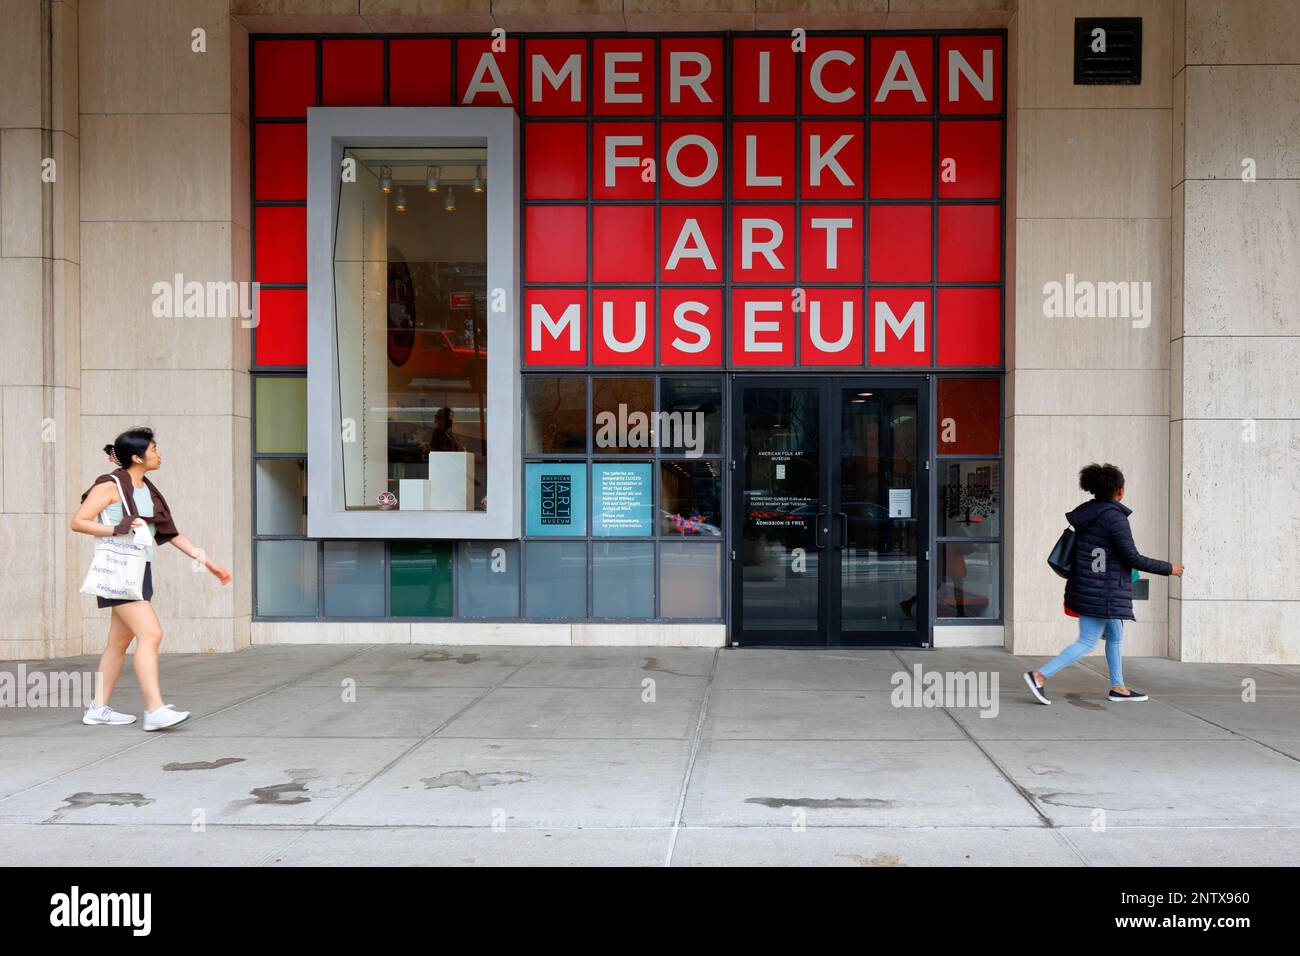 American Folk Art Museum, 2 Lincoln Square, New York. NYC storefront photo of a museum in Manhattan's Upper West Side. Stock Photo